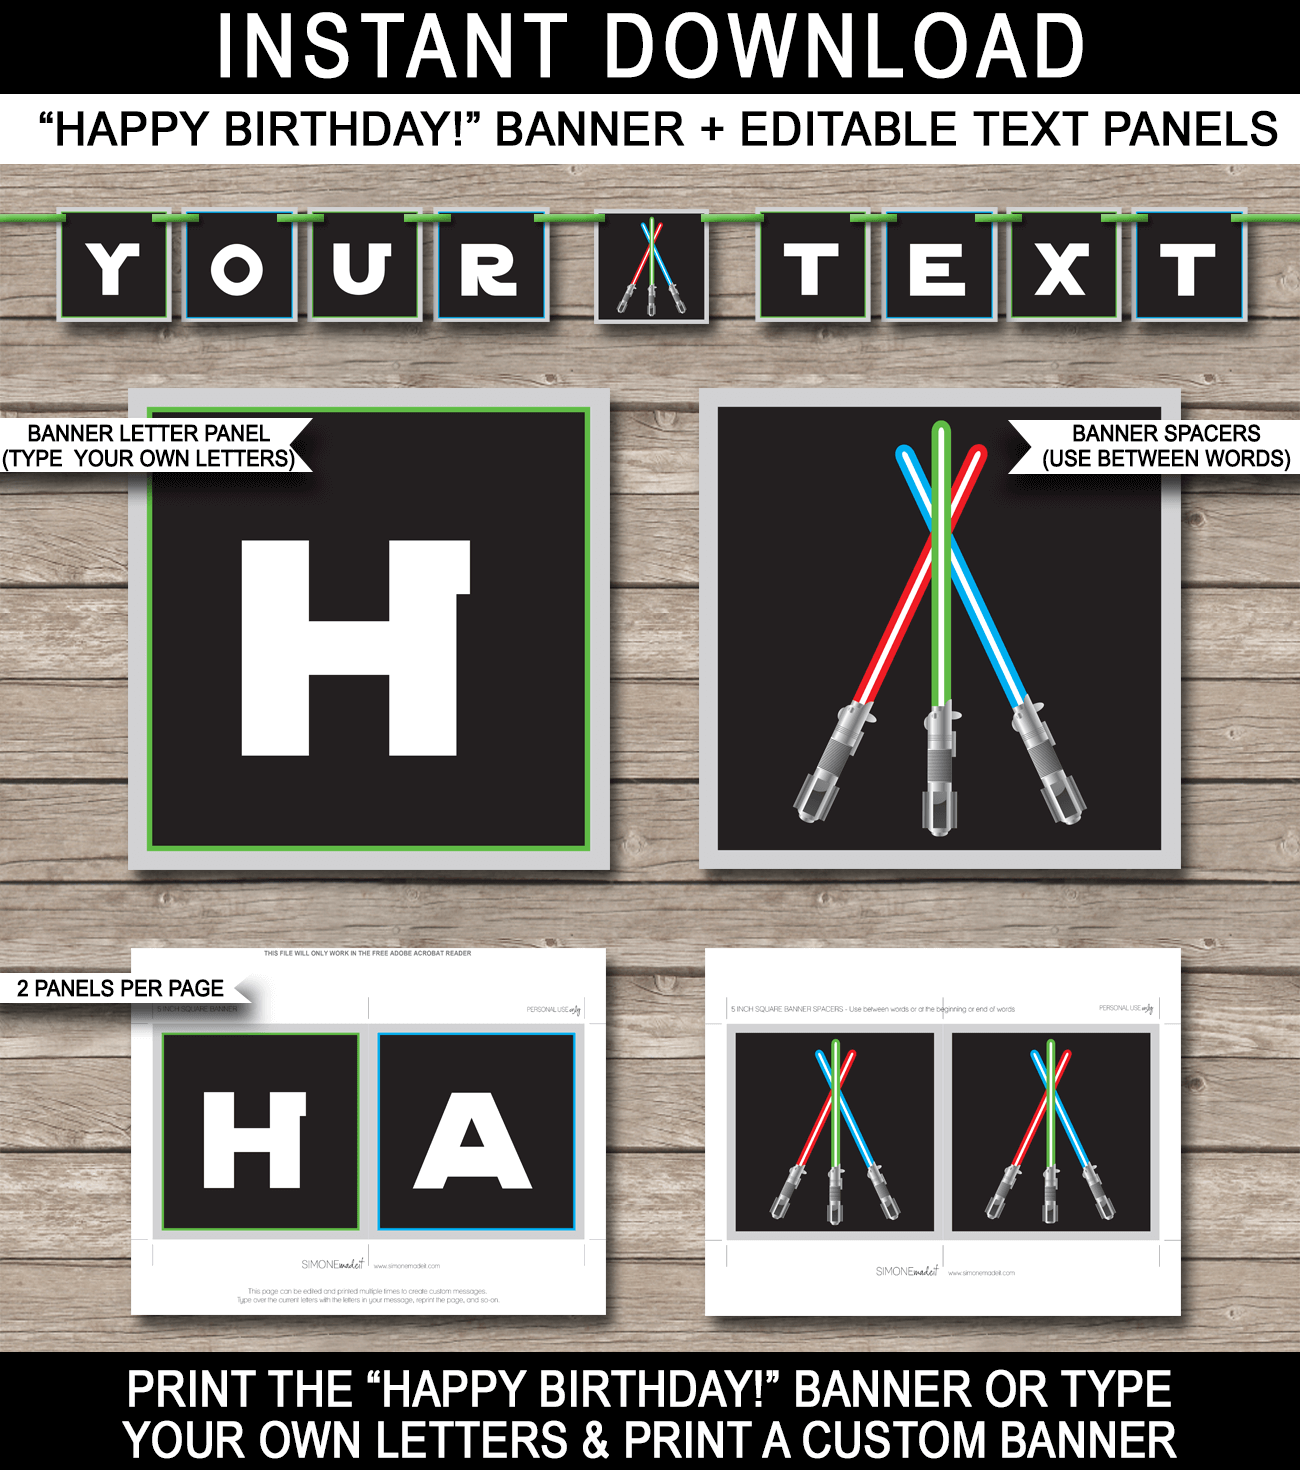 Star Wars Banner Template - Star Wars Bunting - Happy Birthday Pennant Banner - Birthday Party - Editable and Printable DIY Template - INSTANT DOWNLOAD $4.50 via simonemadeit.com